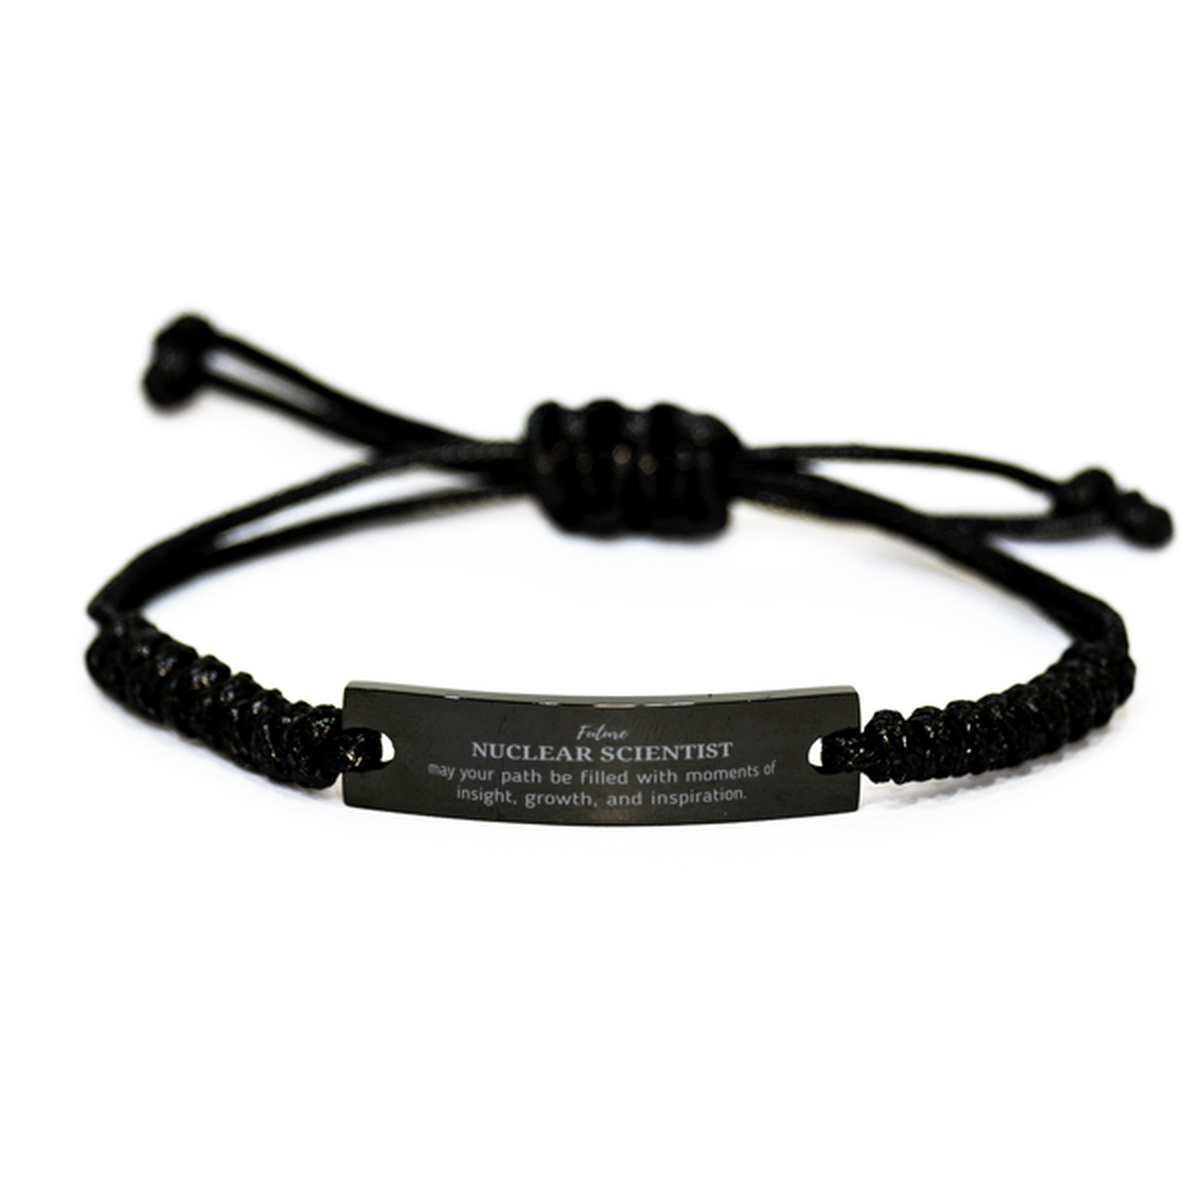 Future Nuclear Scientist Gifts, May your path be filled with moments of insight, Graduation Gifts for New Nuclear Scientist, Christmas Unique Black Rope Bracelet For Men, Women, Friends